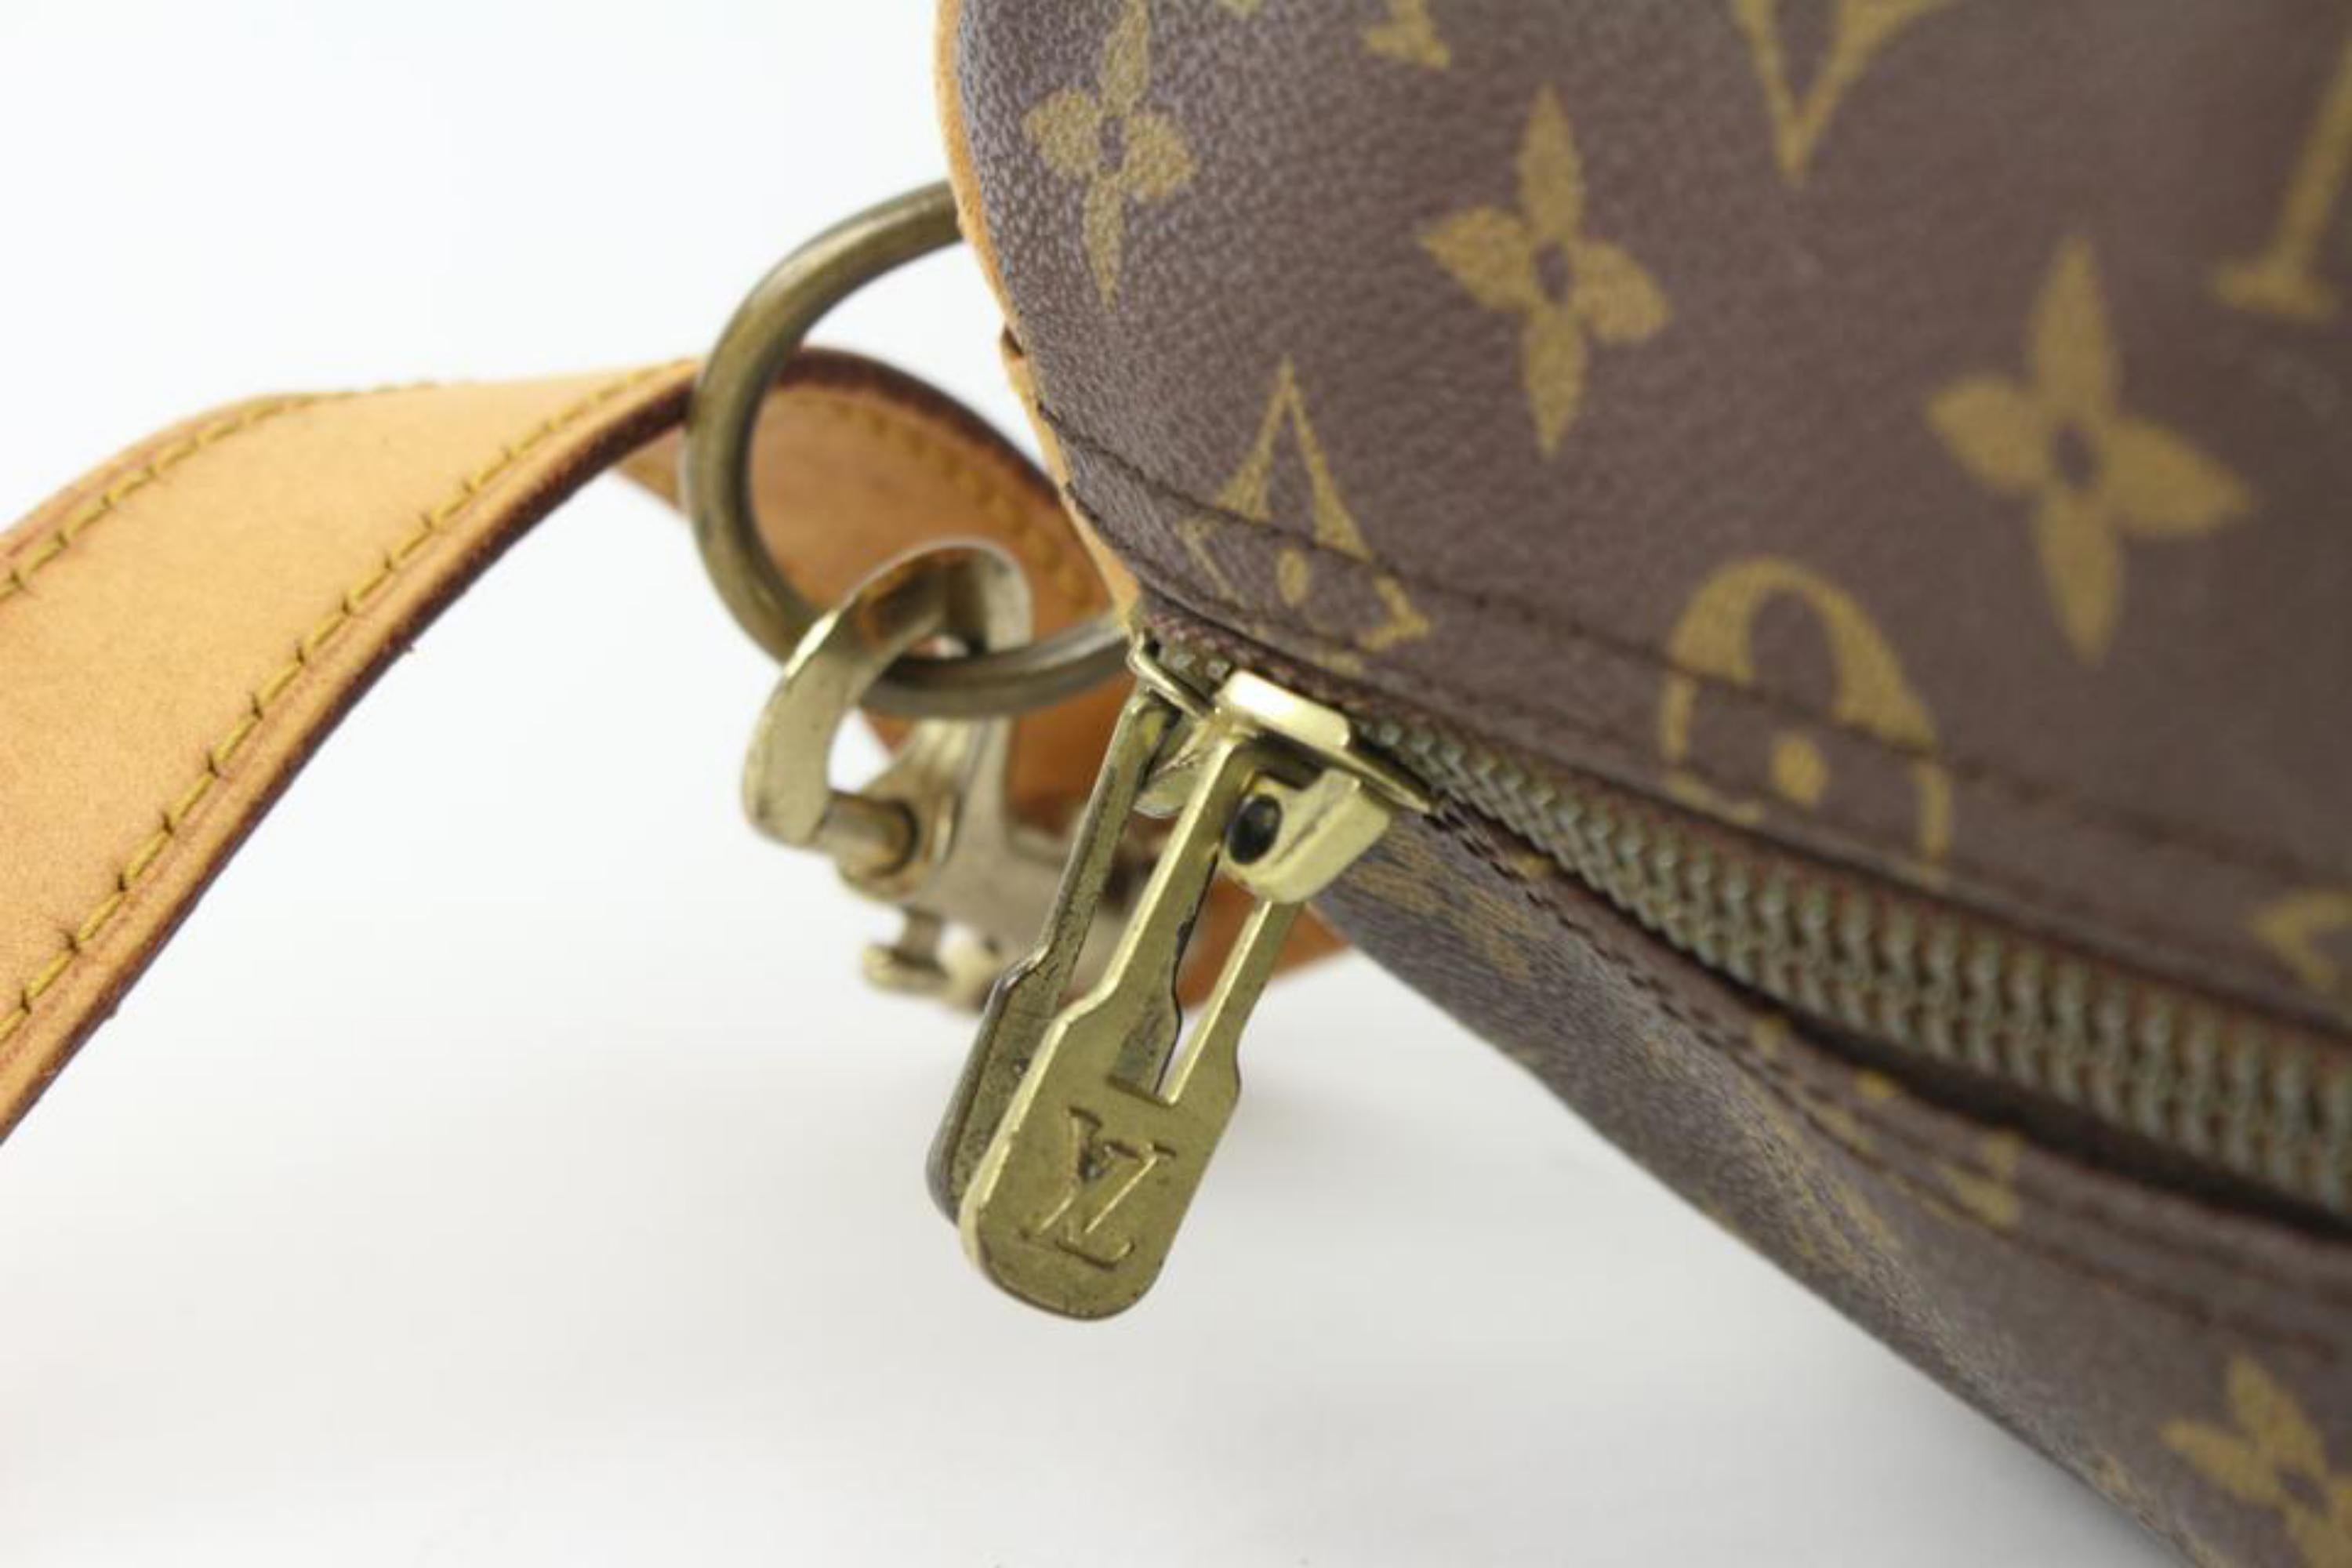 Louis Vuitton Monogram Keepall Bandouliere 55 Duffle Bag with Strap 15lk412s In Fair Condition For Sale In Dix hills, NY